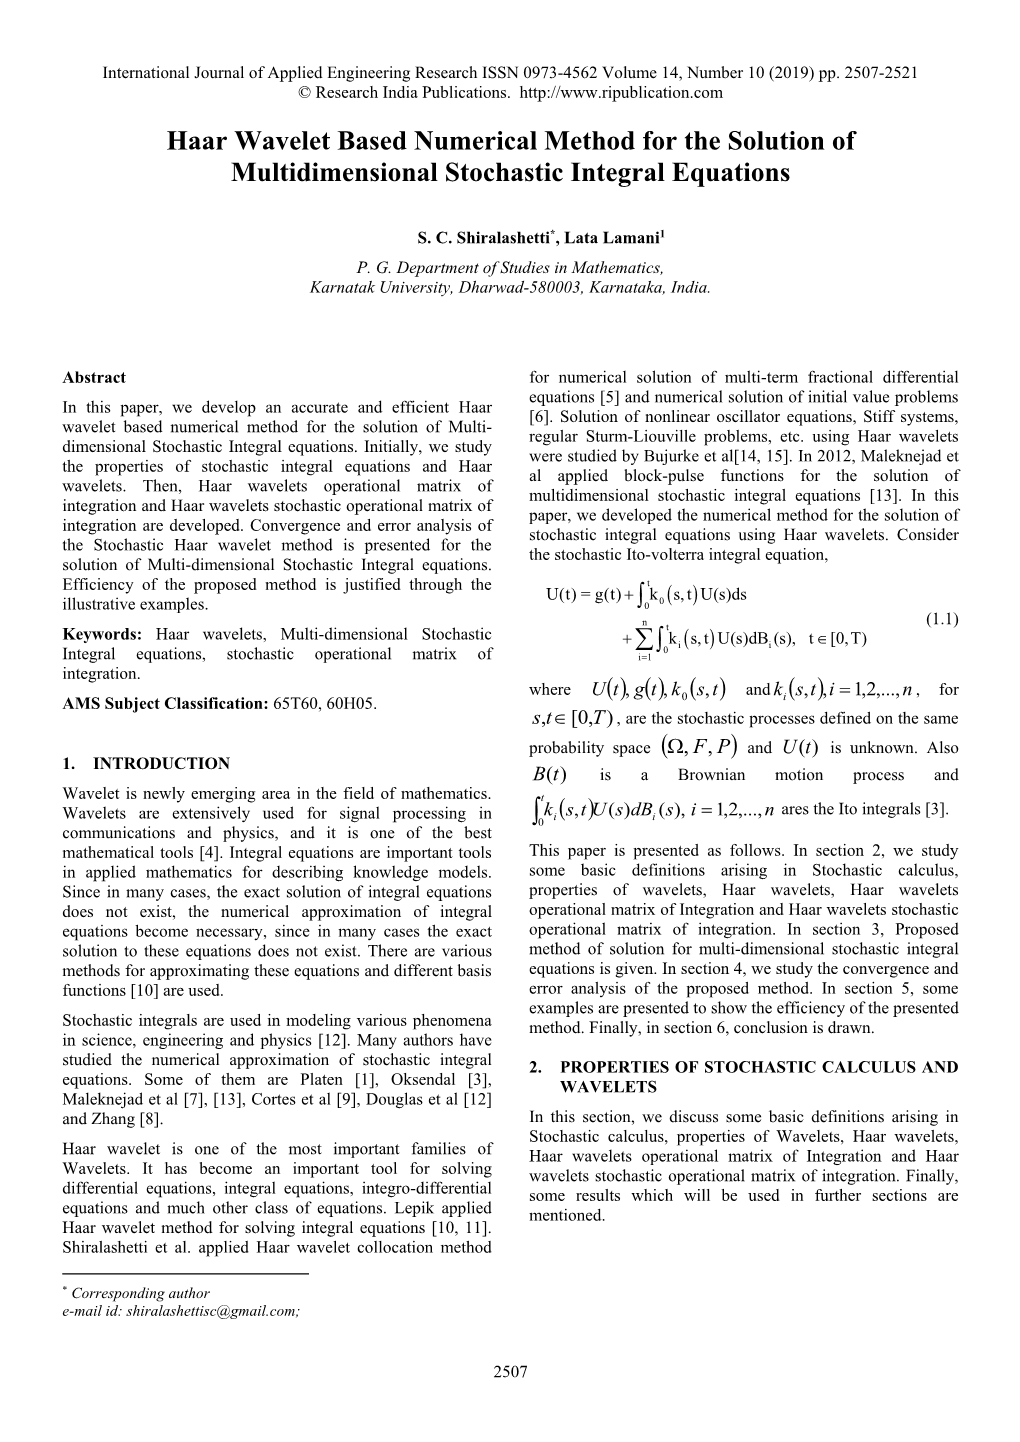 Haar Wavelet Based Numerical Method for the Solution of Multidimensional Stochastic Integral Equations